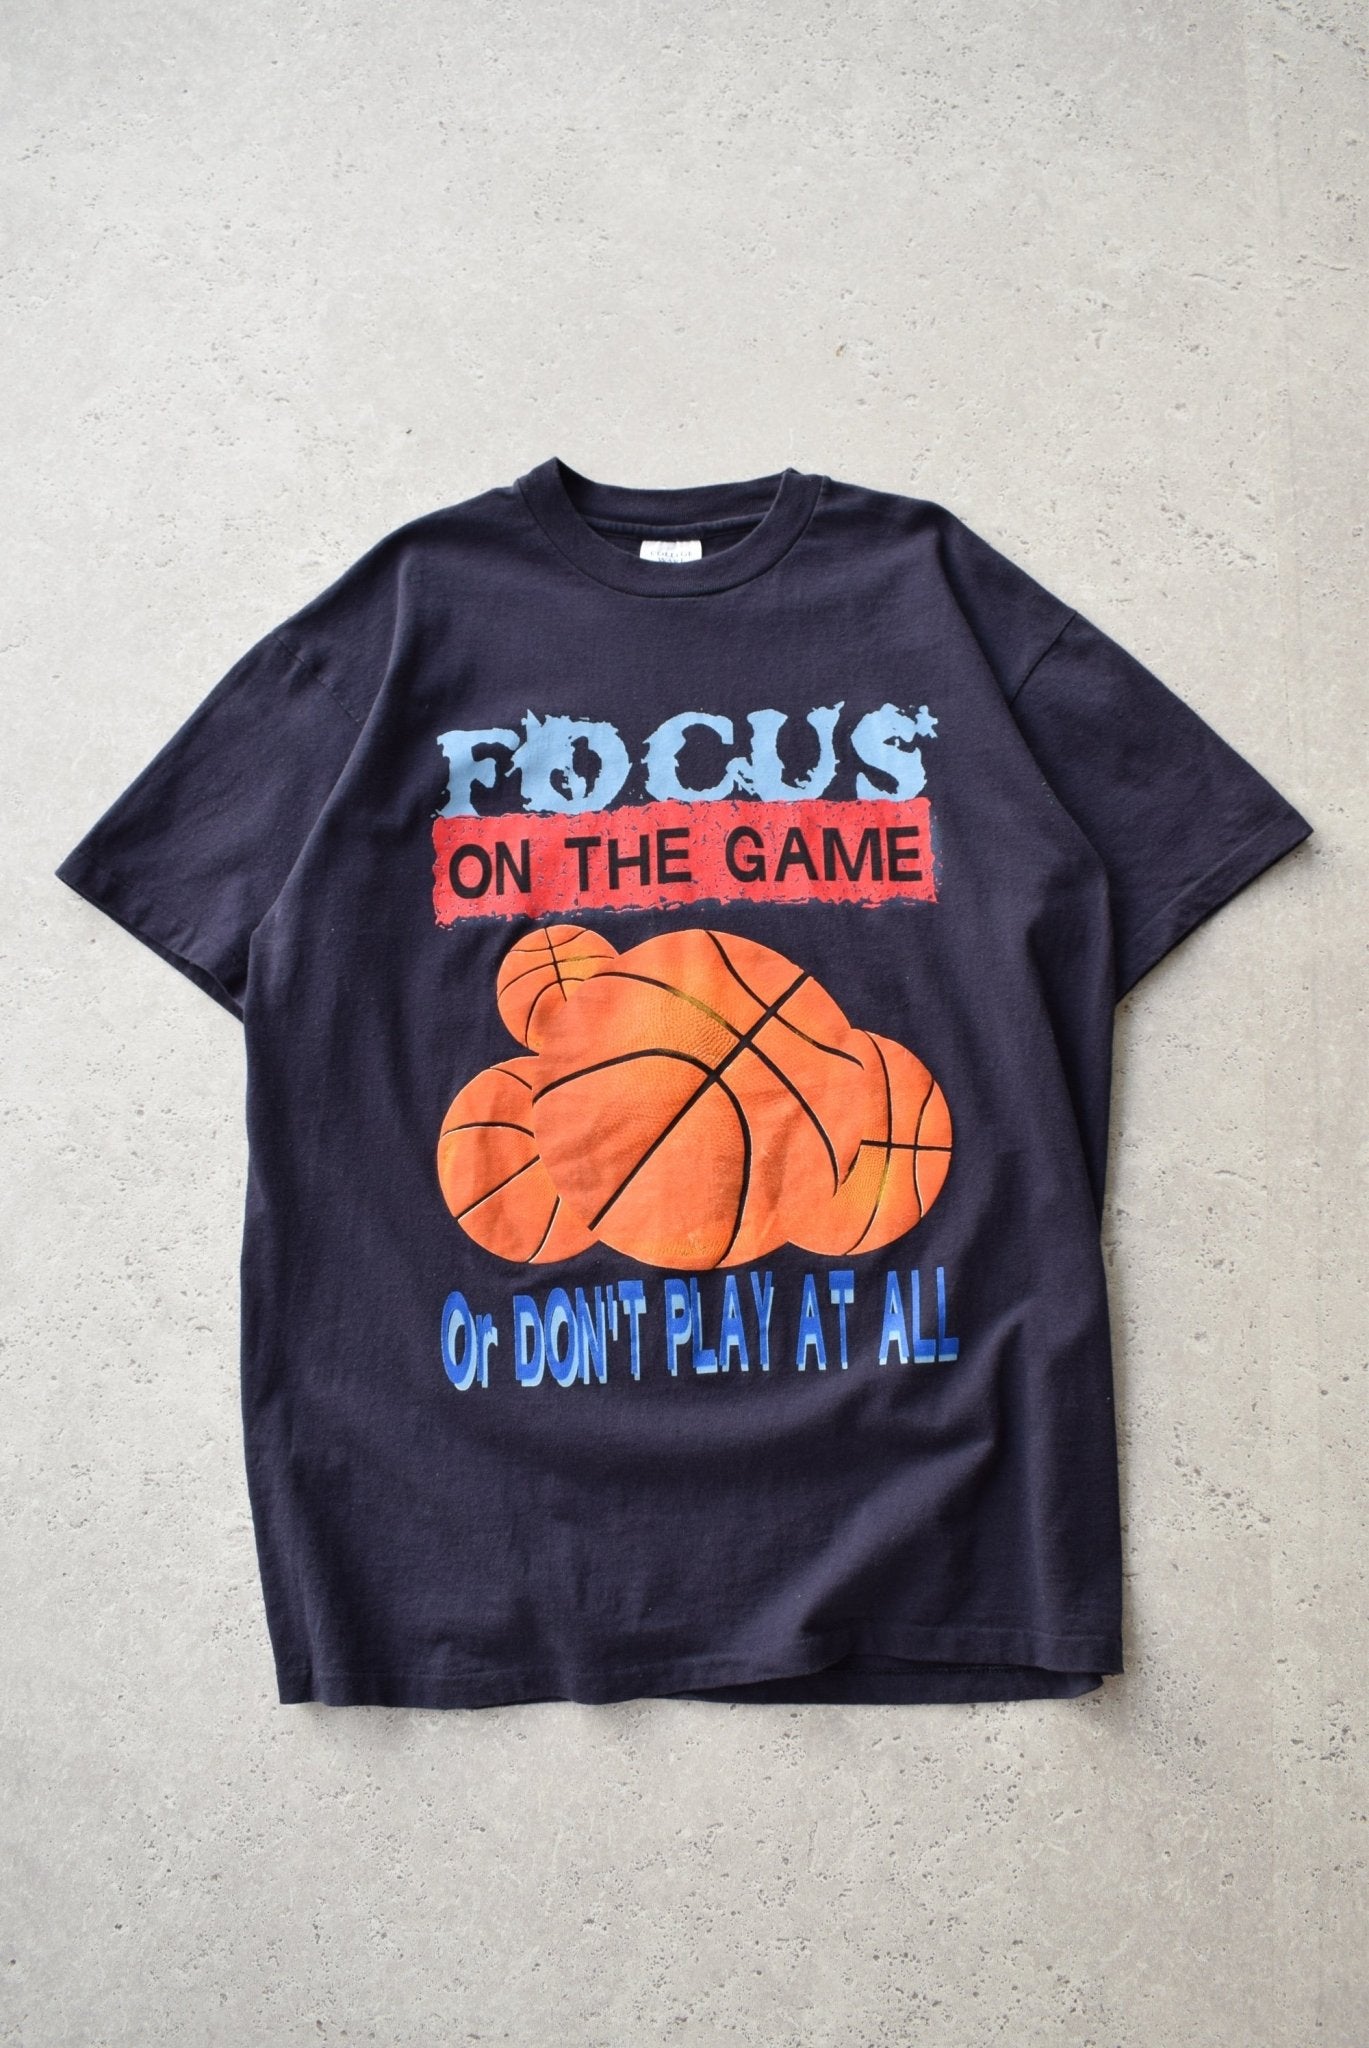 Vintage 90s 'Focus On The Game' Basketball Tee (L) - Retrospective Store